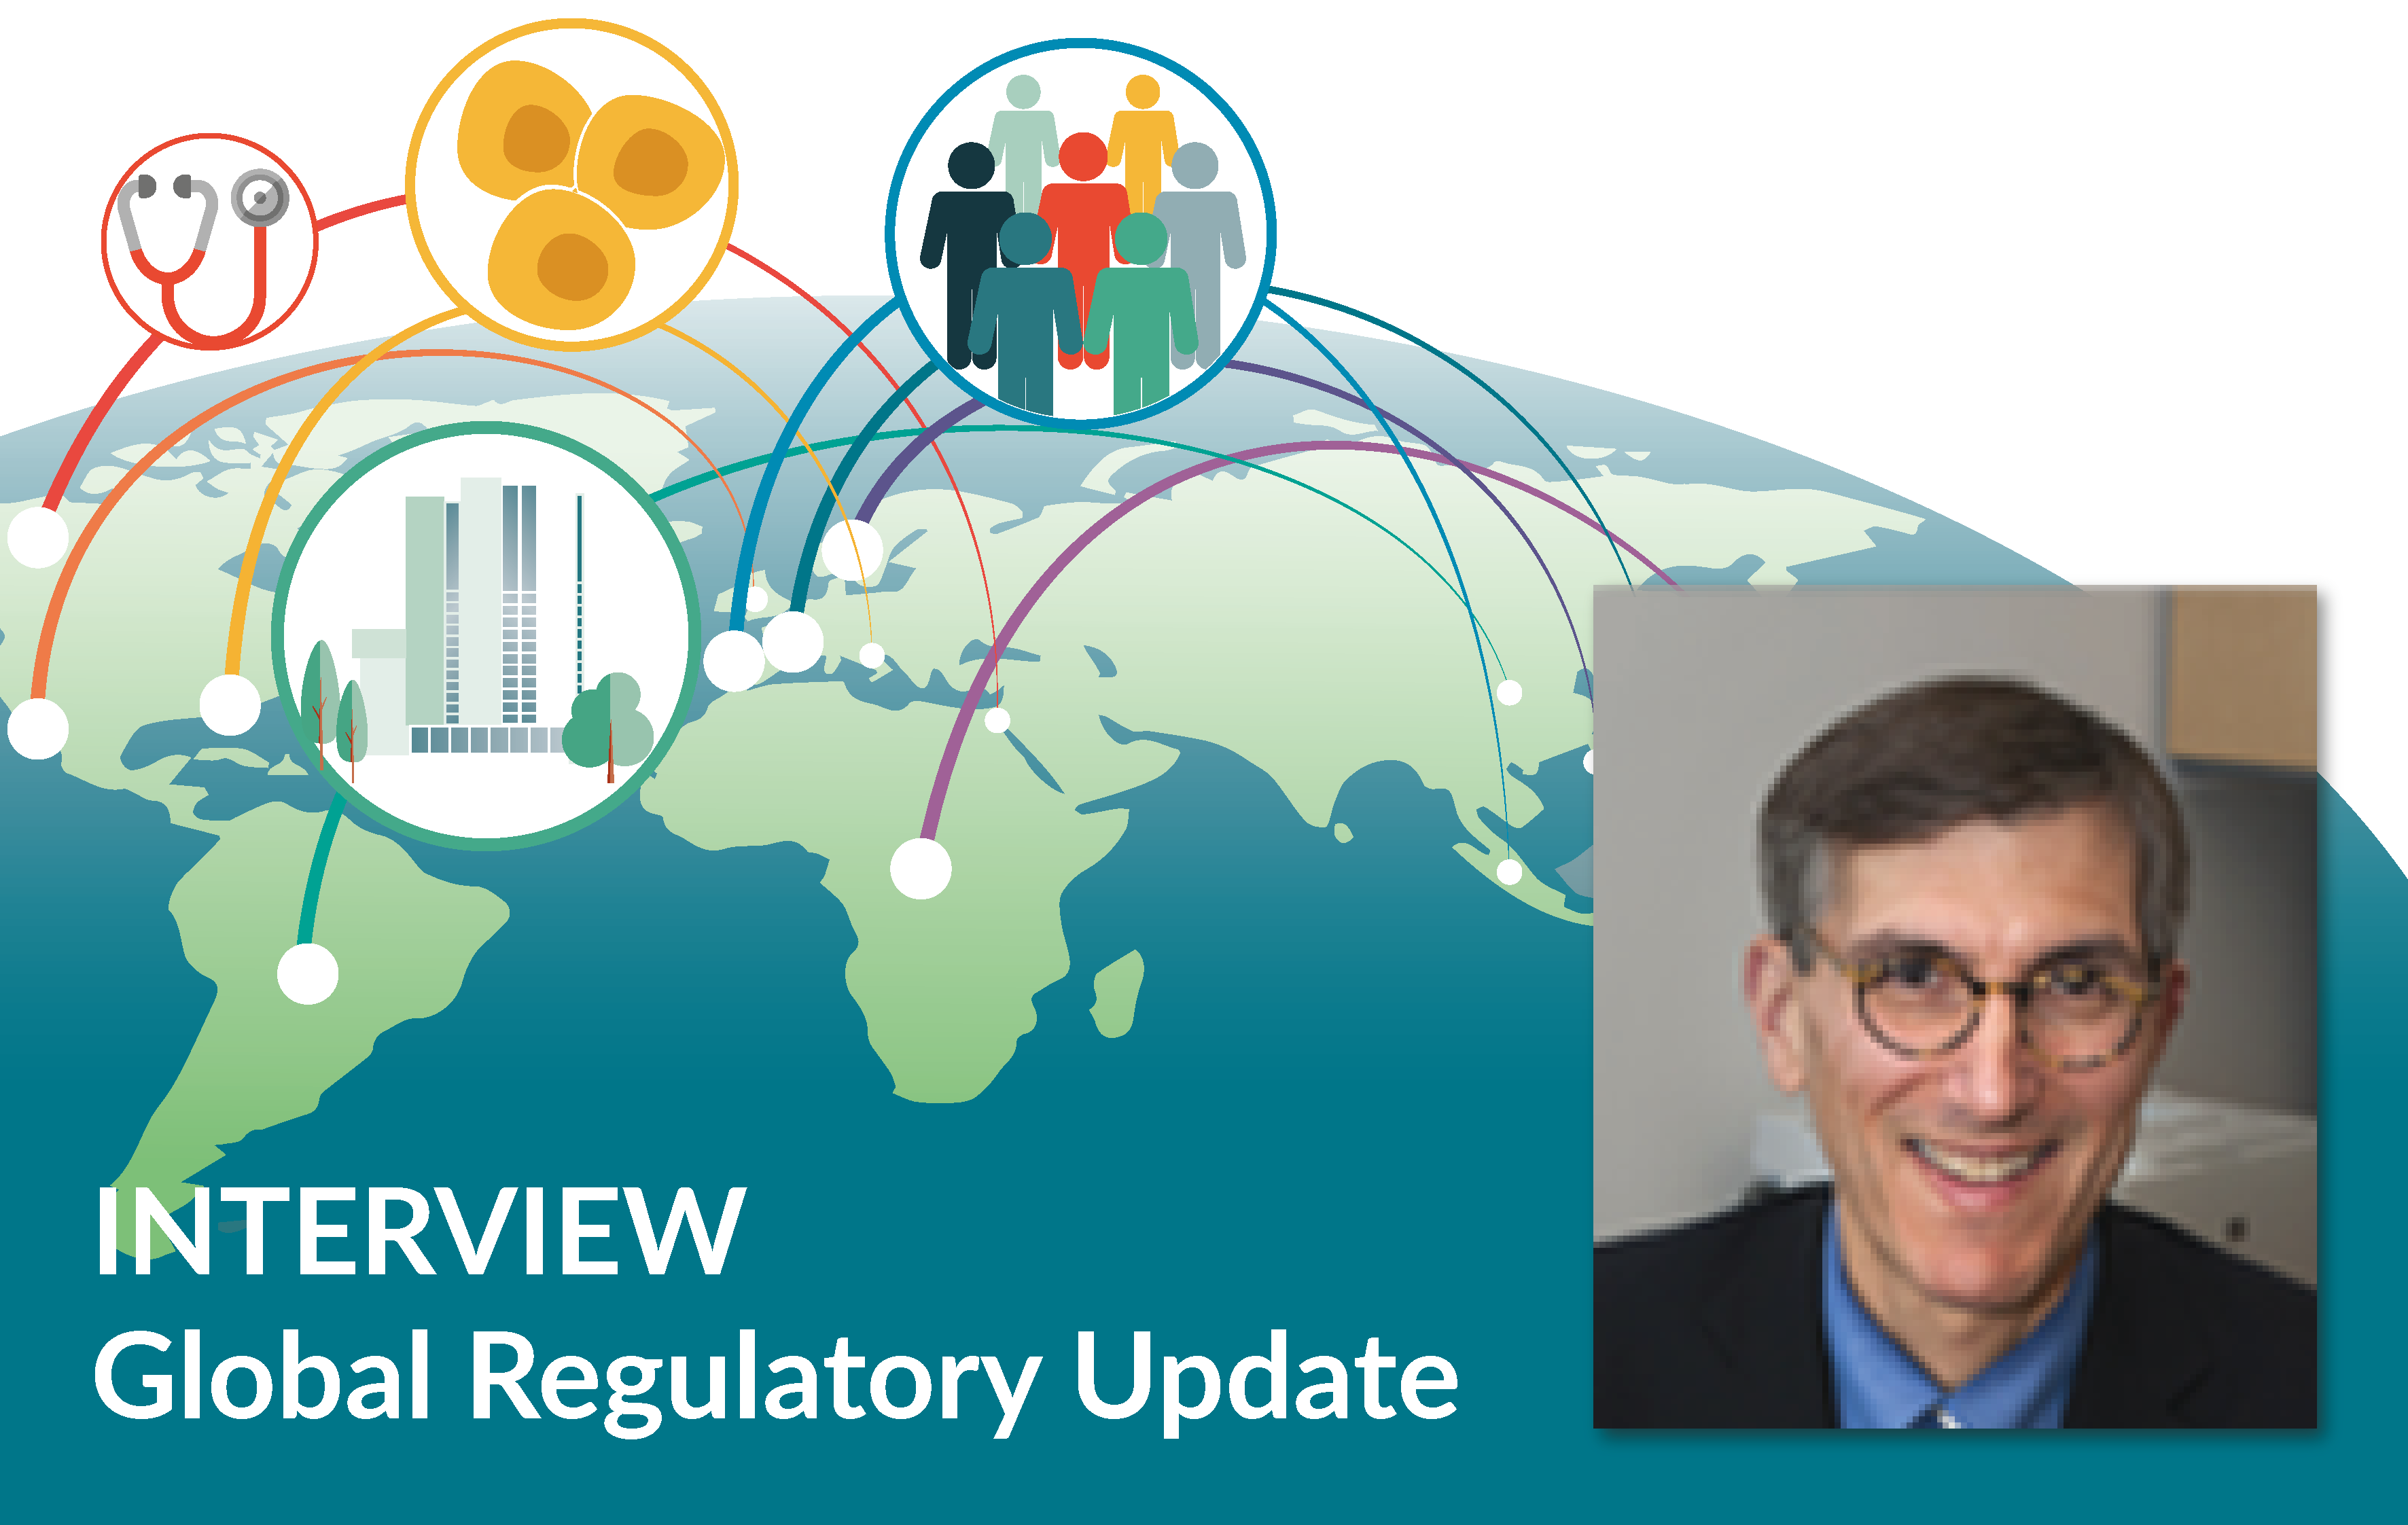 US FDA goals and priorities for  cell & gene therapy regulation